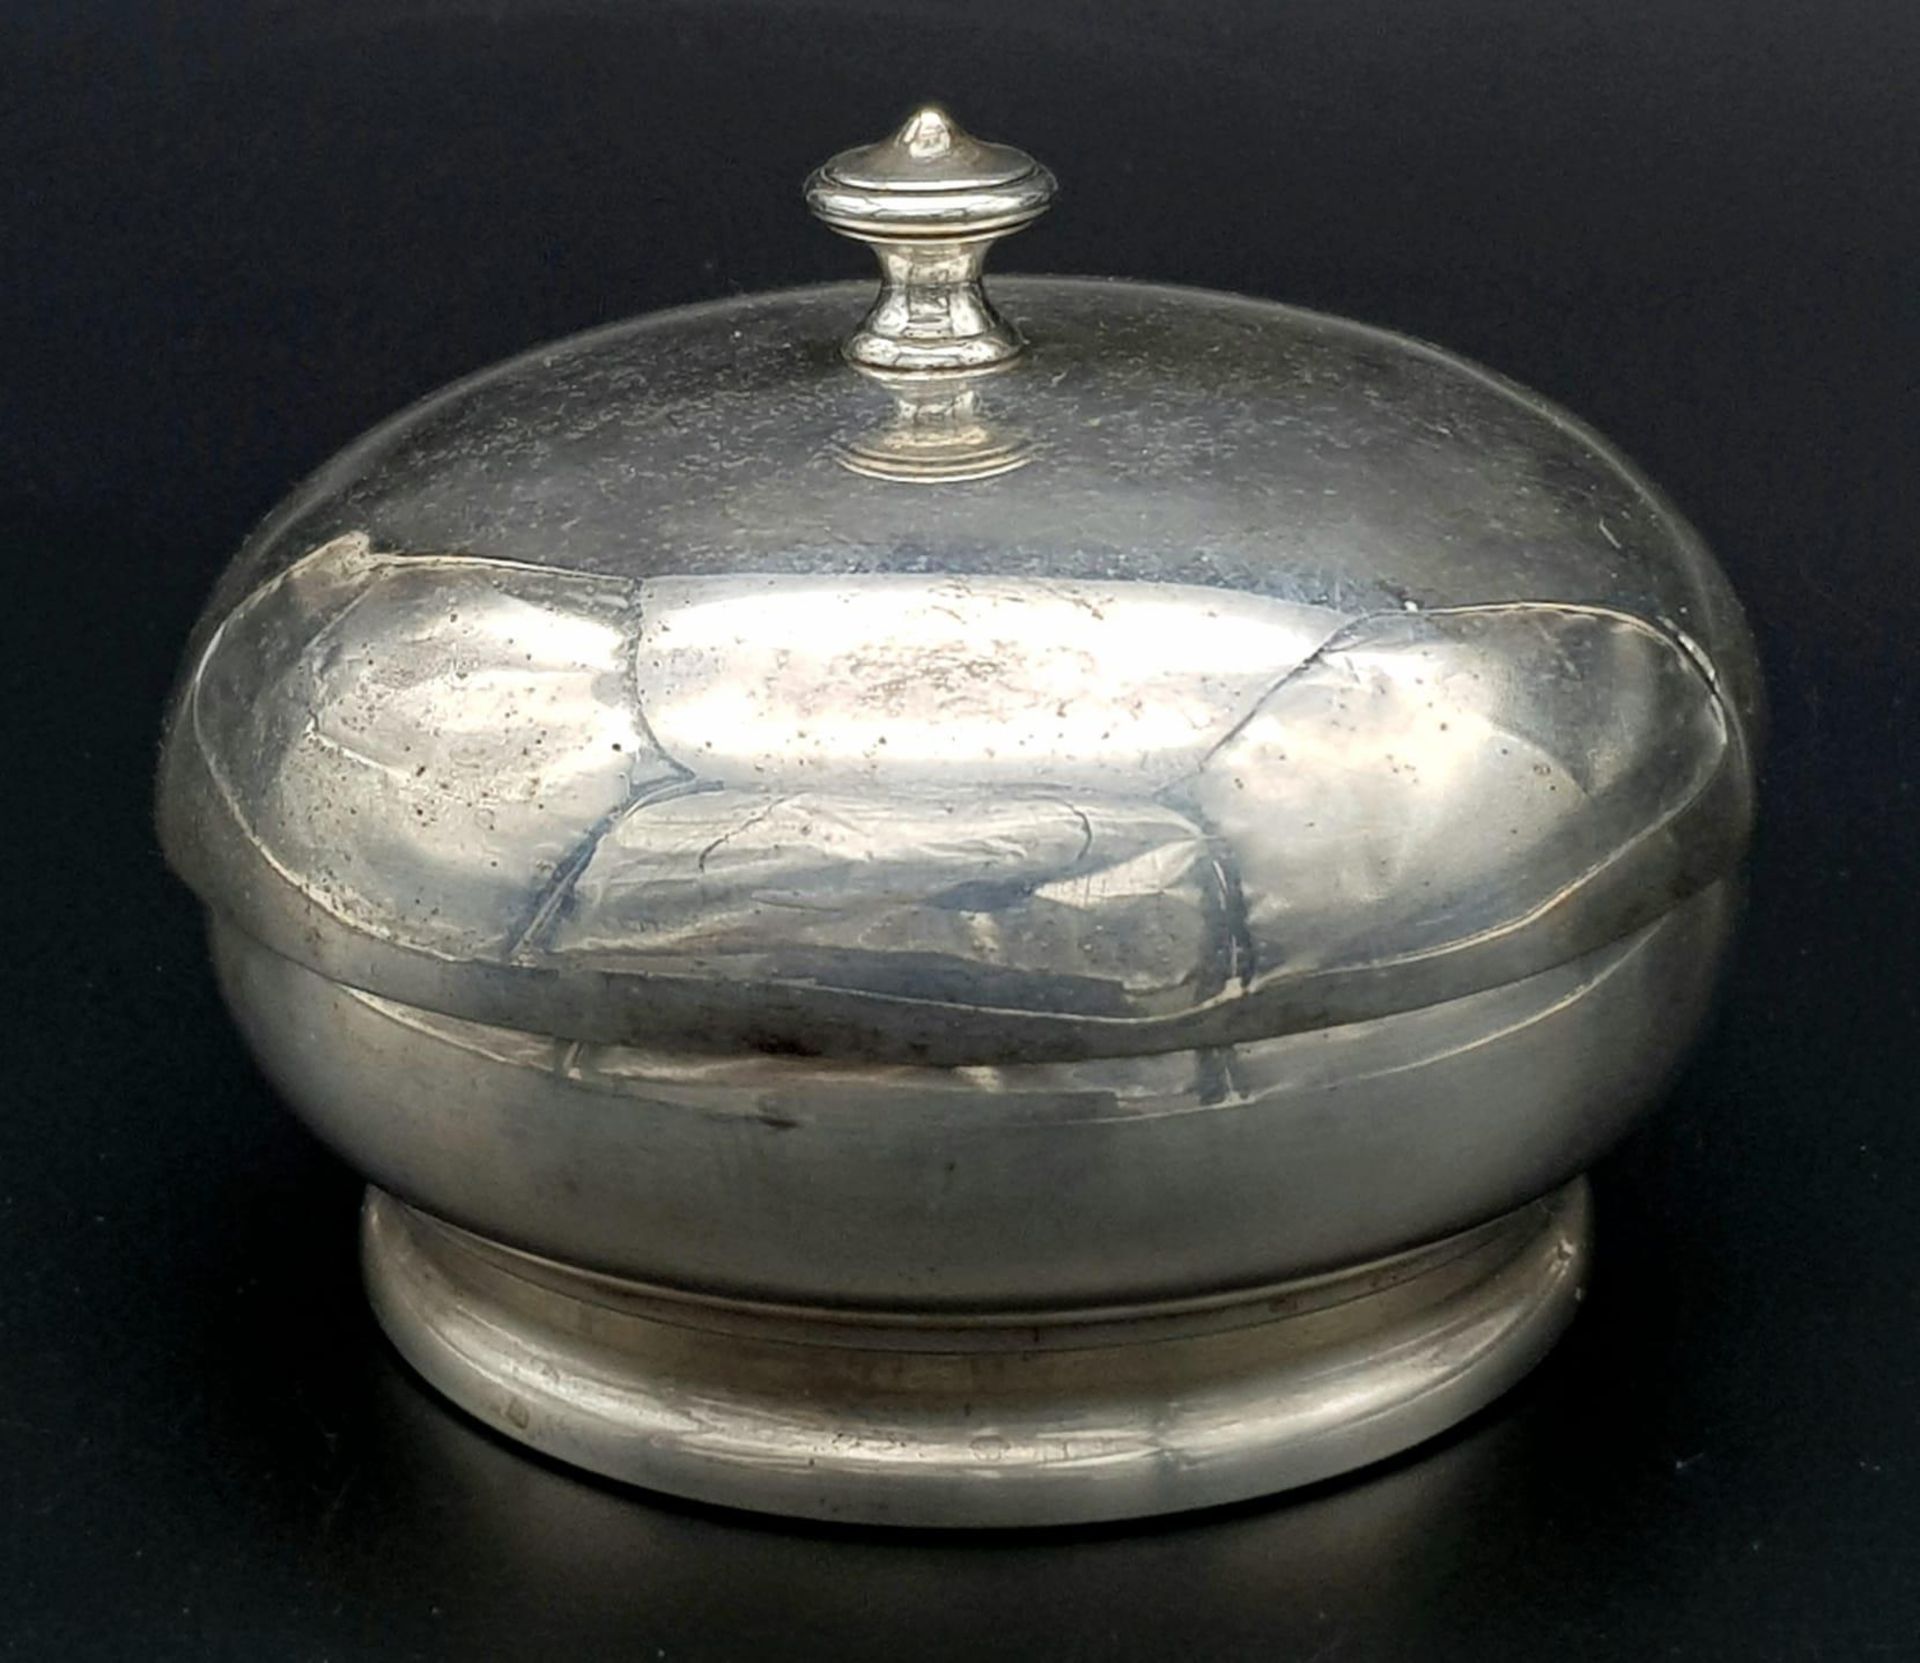 A SOLID SILVER TRINKET BOX IN THE SHAPE OF A SERVICE BELL . 164gms 11cms DIAMETER - Image 3 of 5